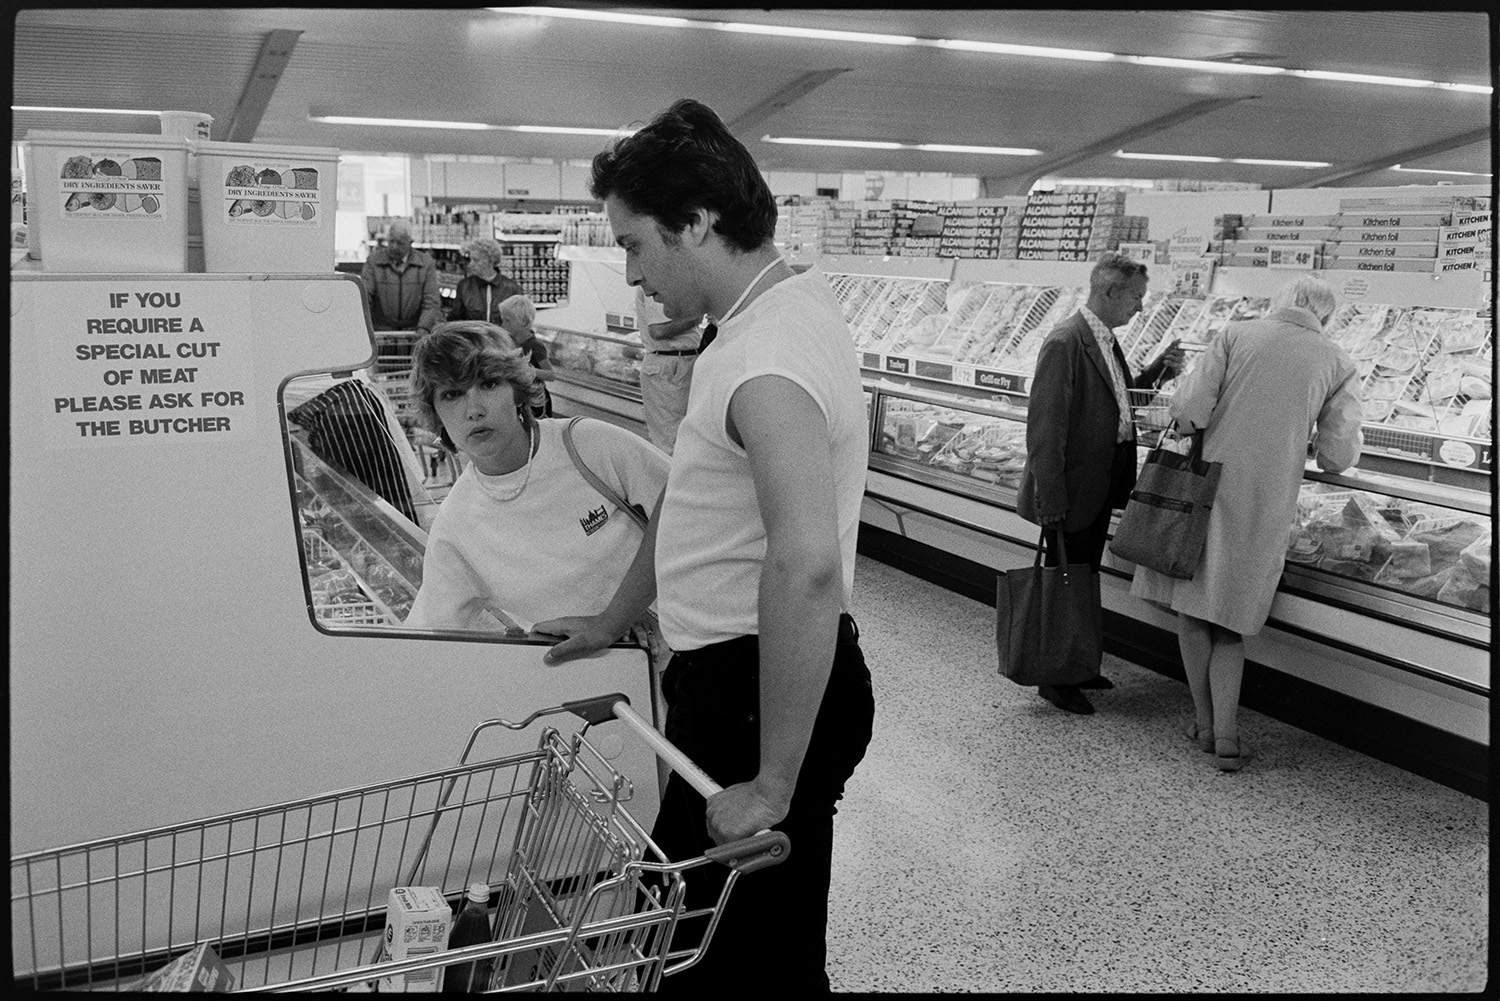 Interior of supermarket, people shopping, car park. Fruit, cash desk, check out.
[Women and men selecting items from chiller cabinets in the Presto Food Market in Bideford and placing the items in shopping trolleys. A sign on one of the cabinets reads 'If you require a special cut of meat please ask for the butcher'.]